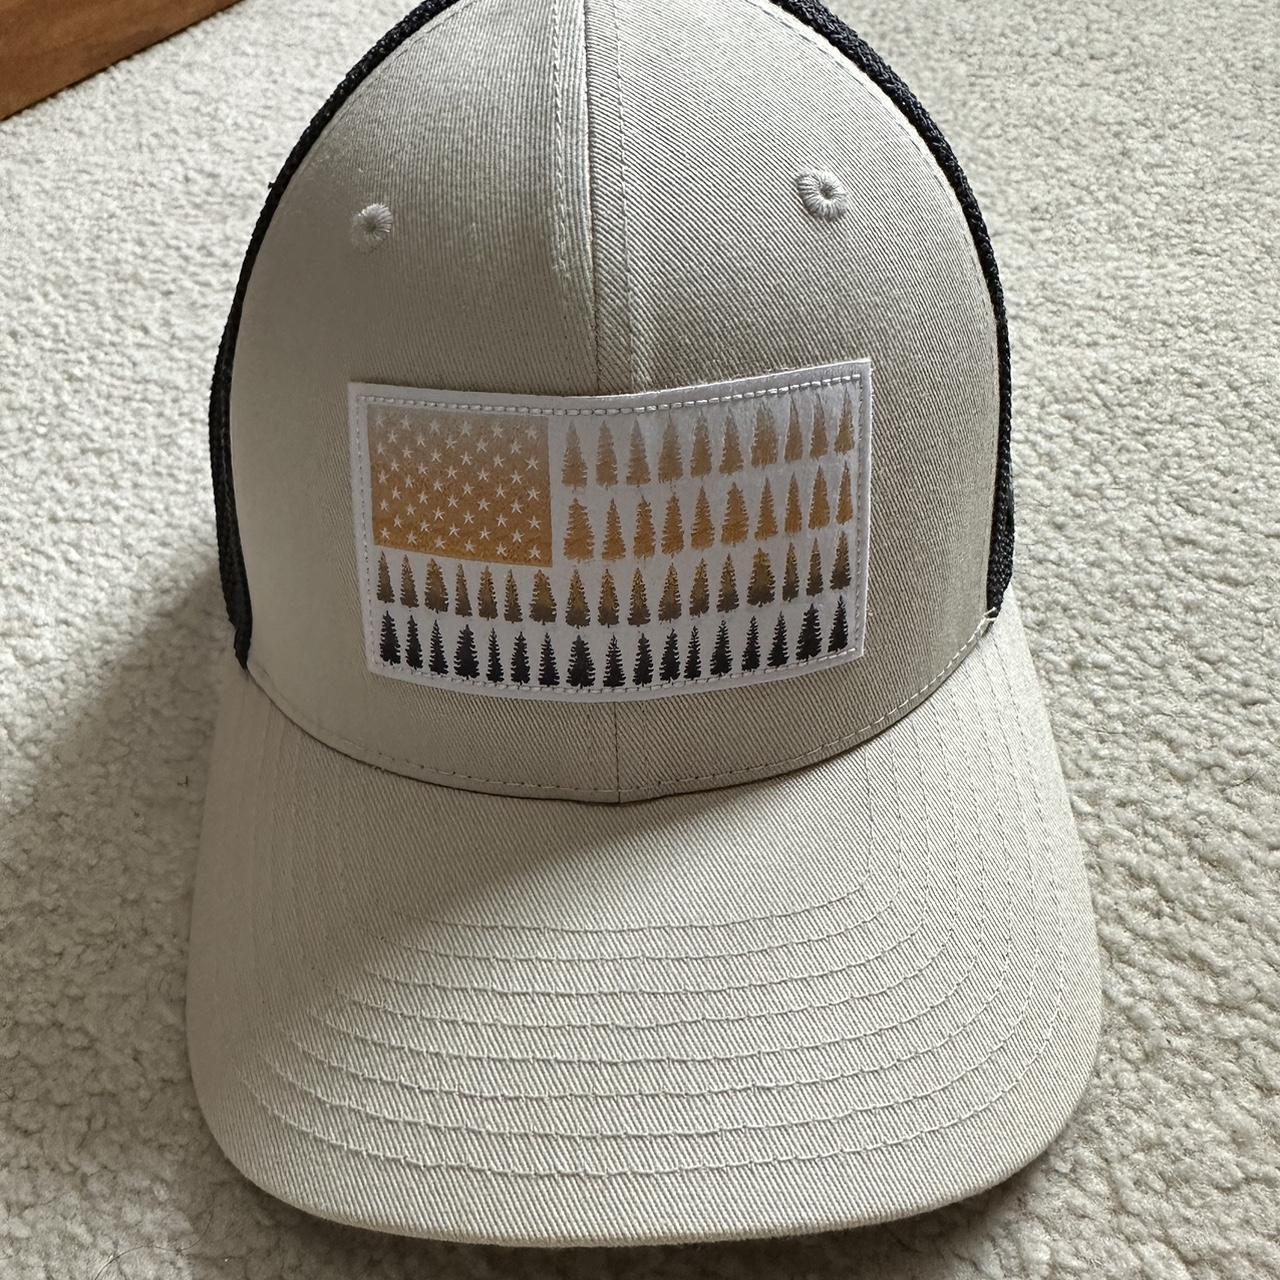 All size fits to head. Never worn brand new trucker